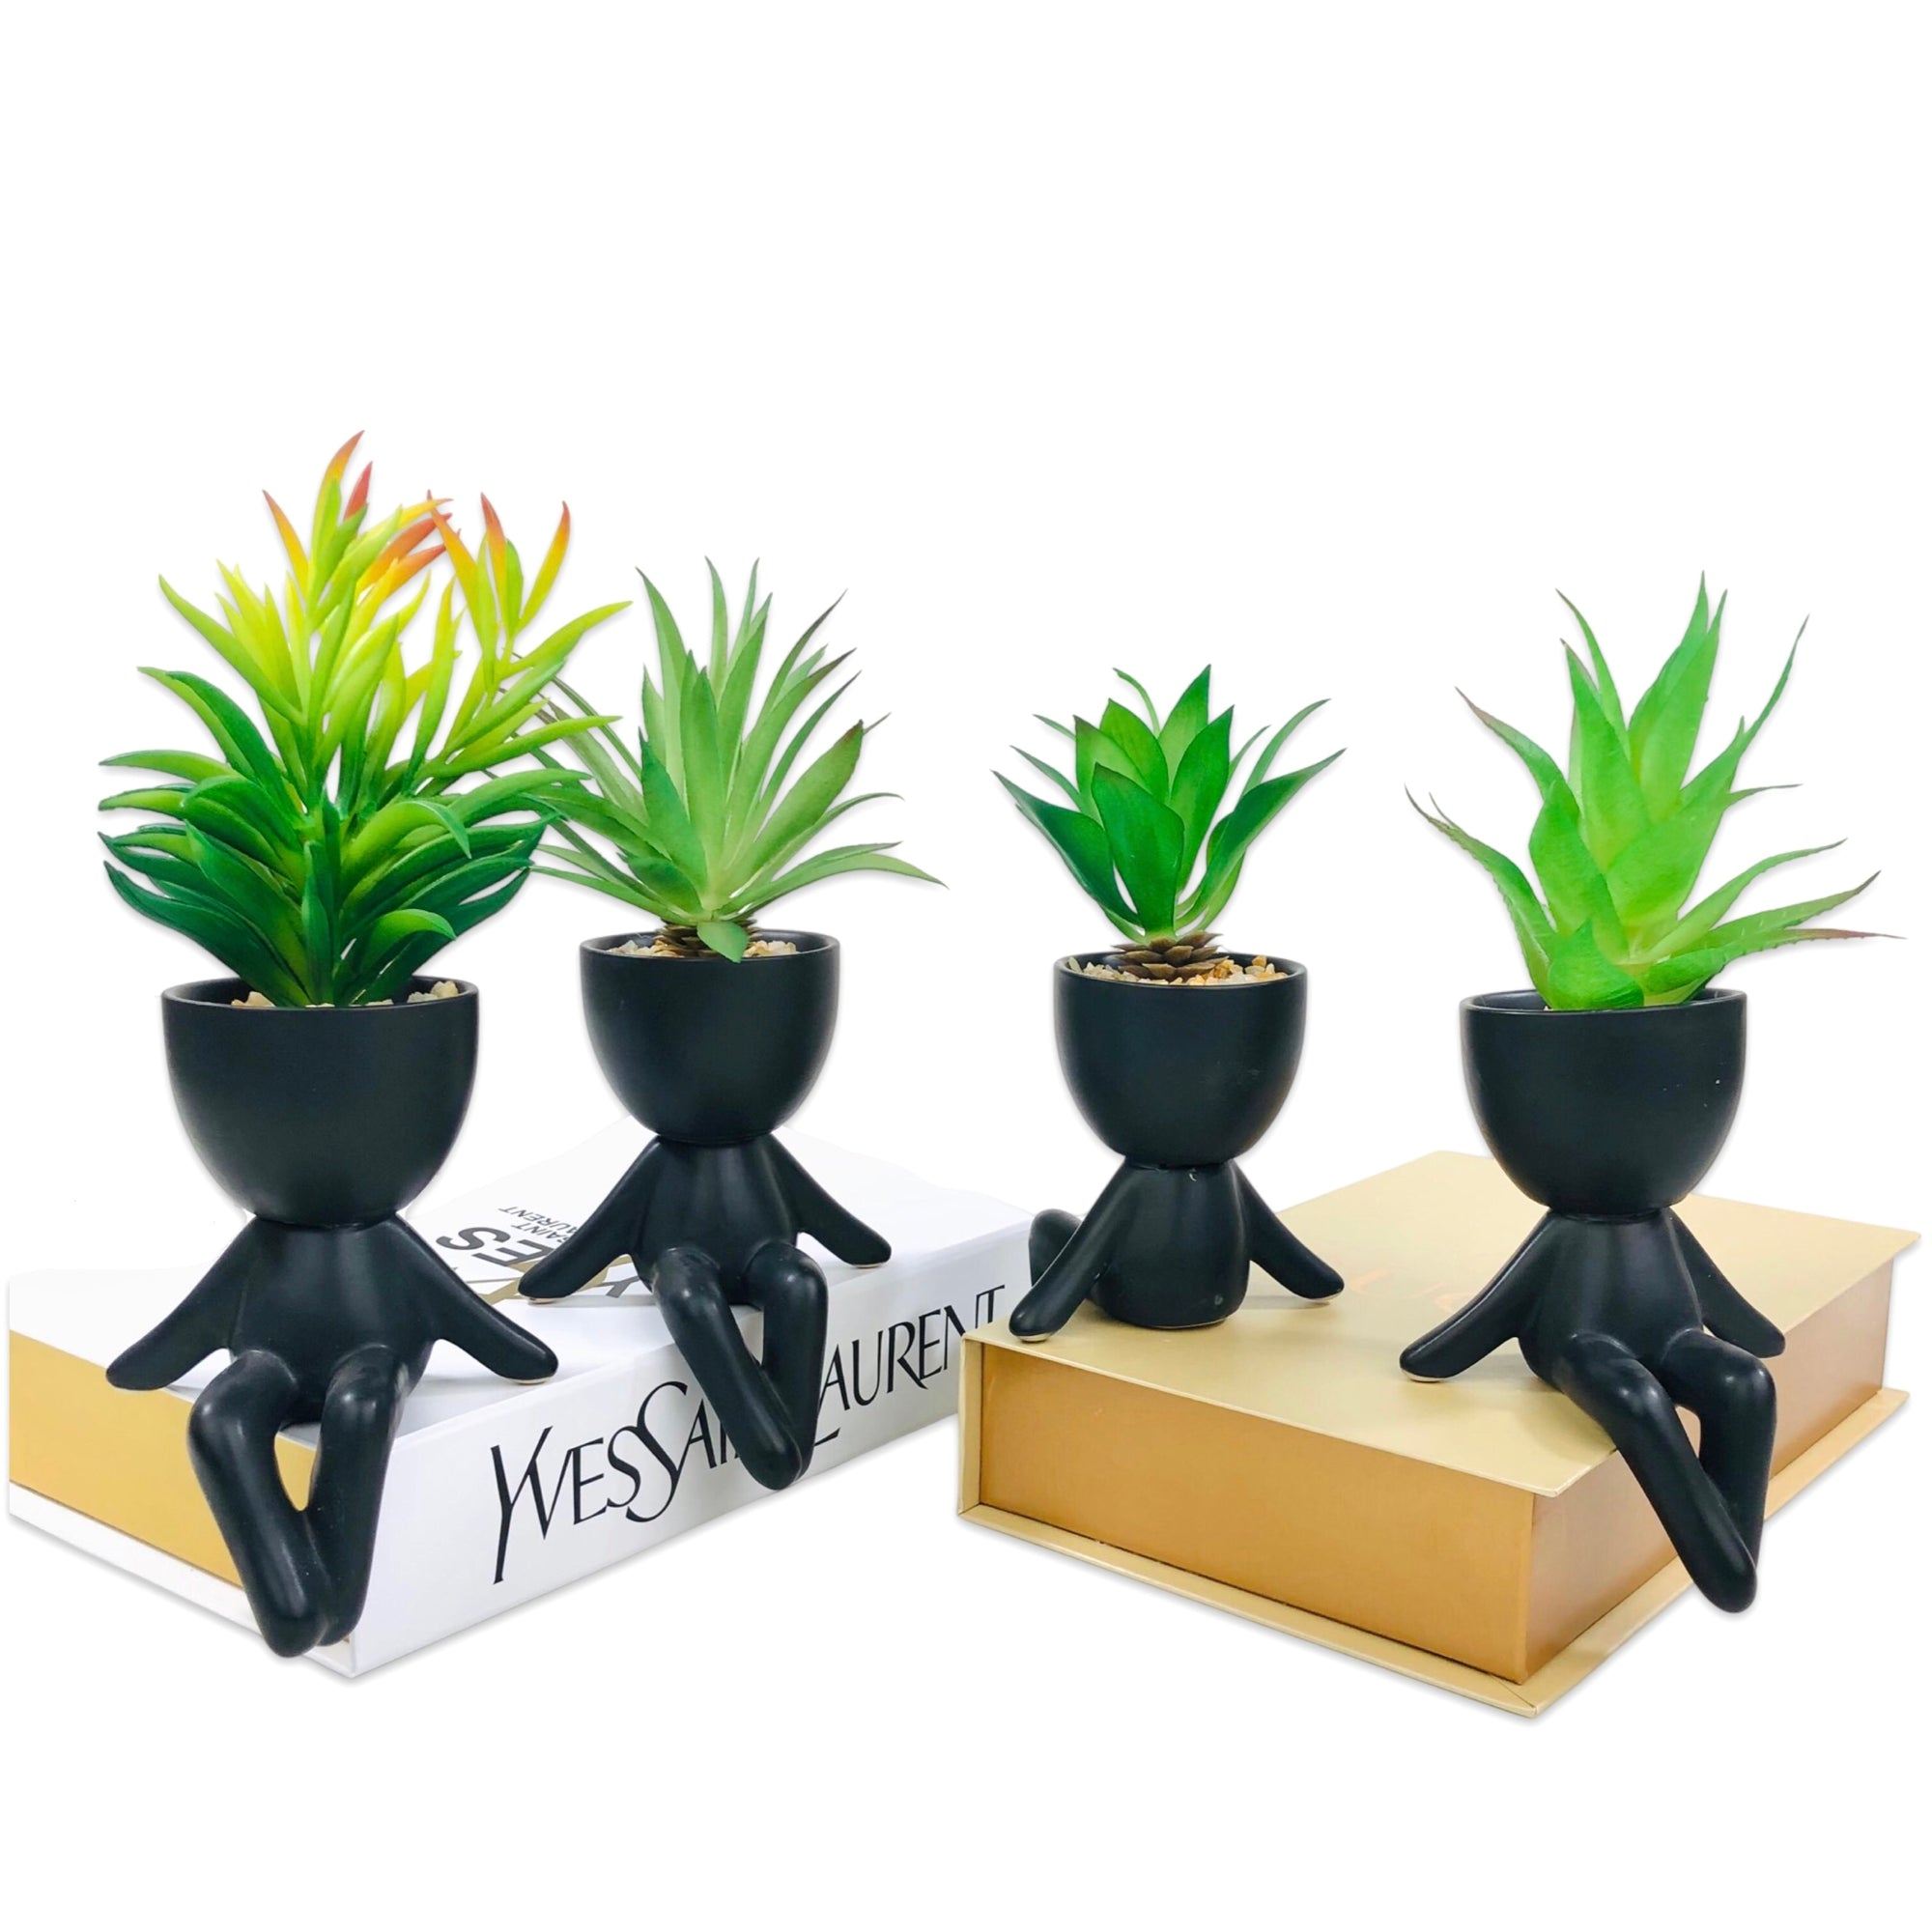 Chilling on Wall Pot Planter (Black)